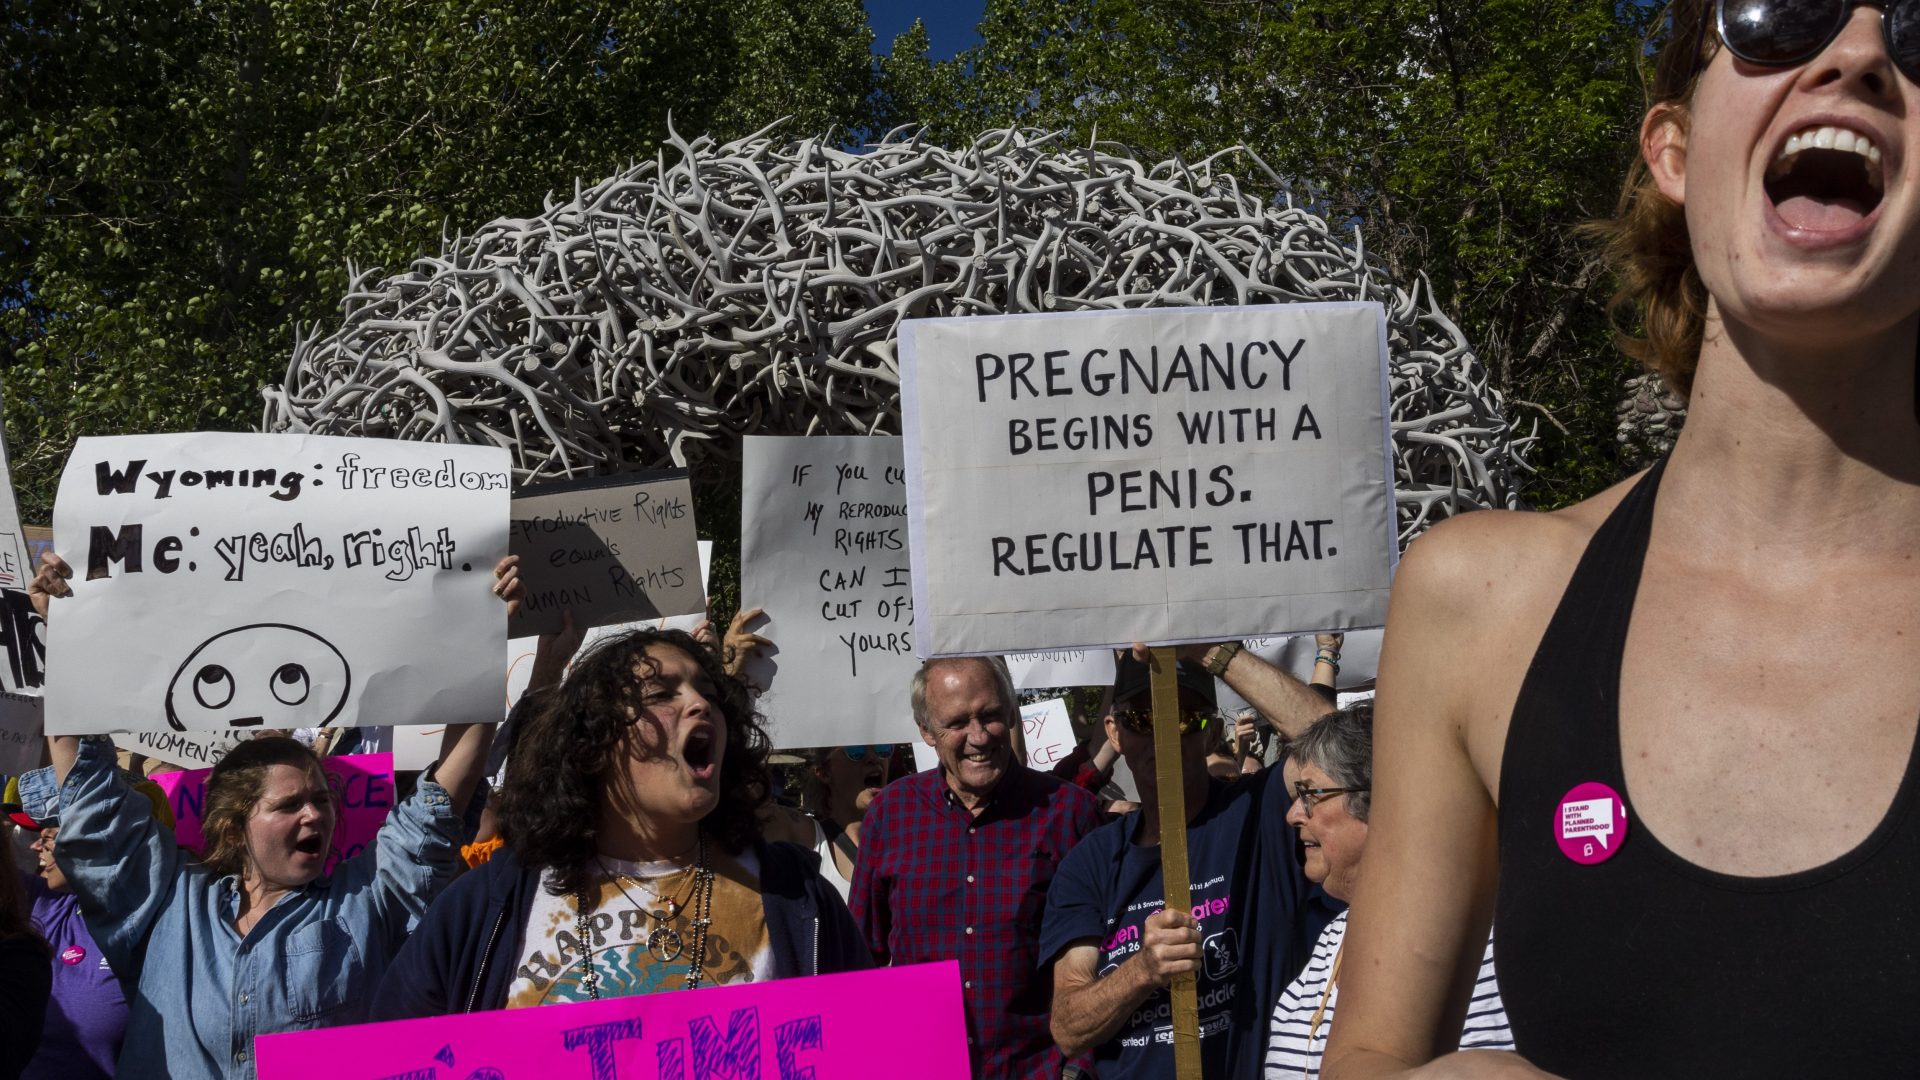 Wyoming is the first US state to ban medical abortion